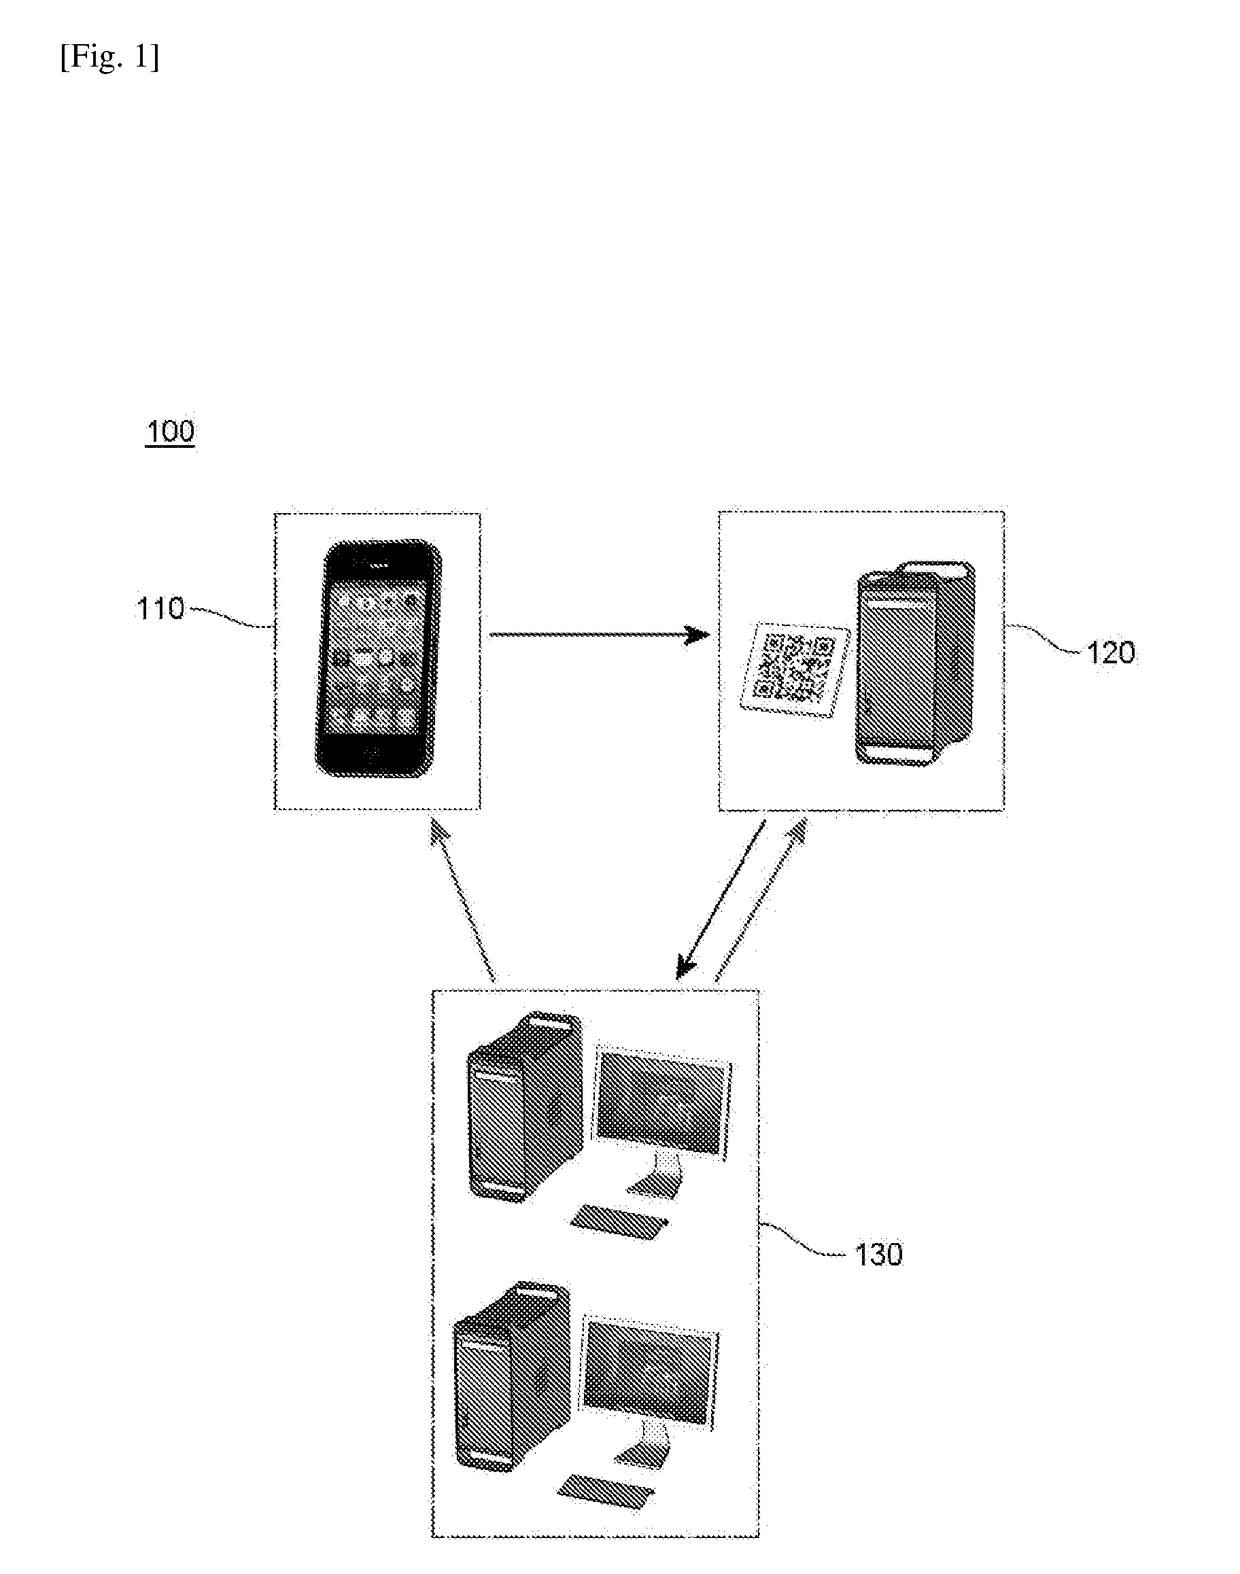 Authentication system and method using flash of smart mobile